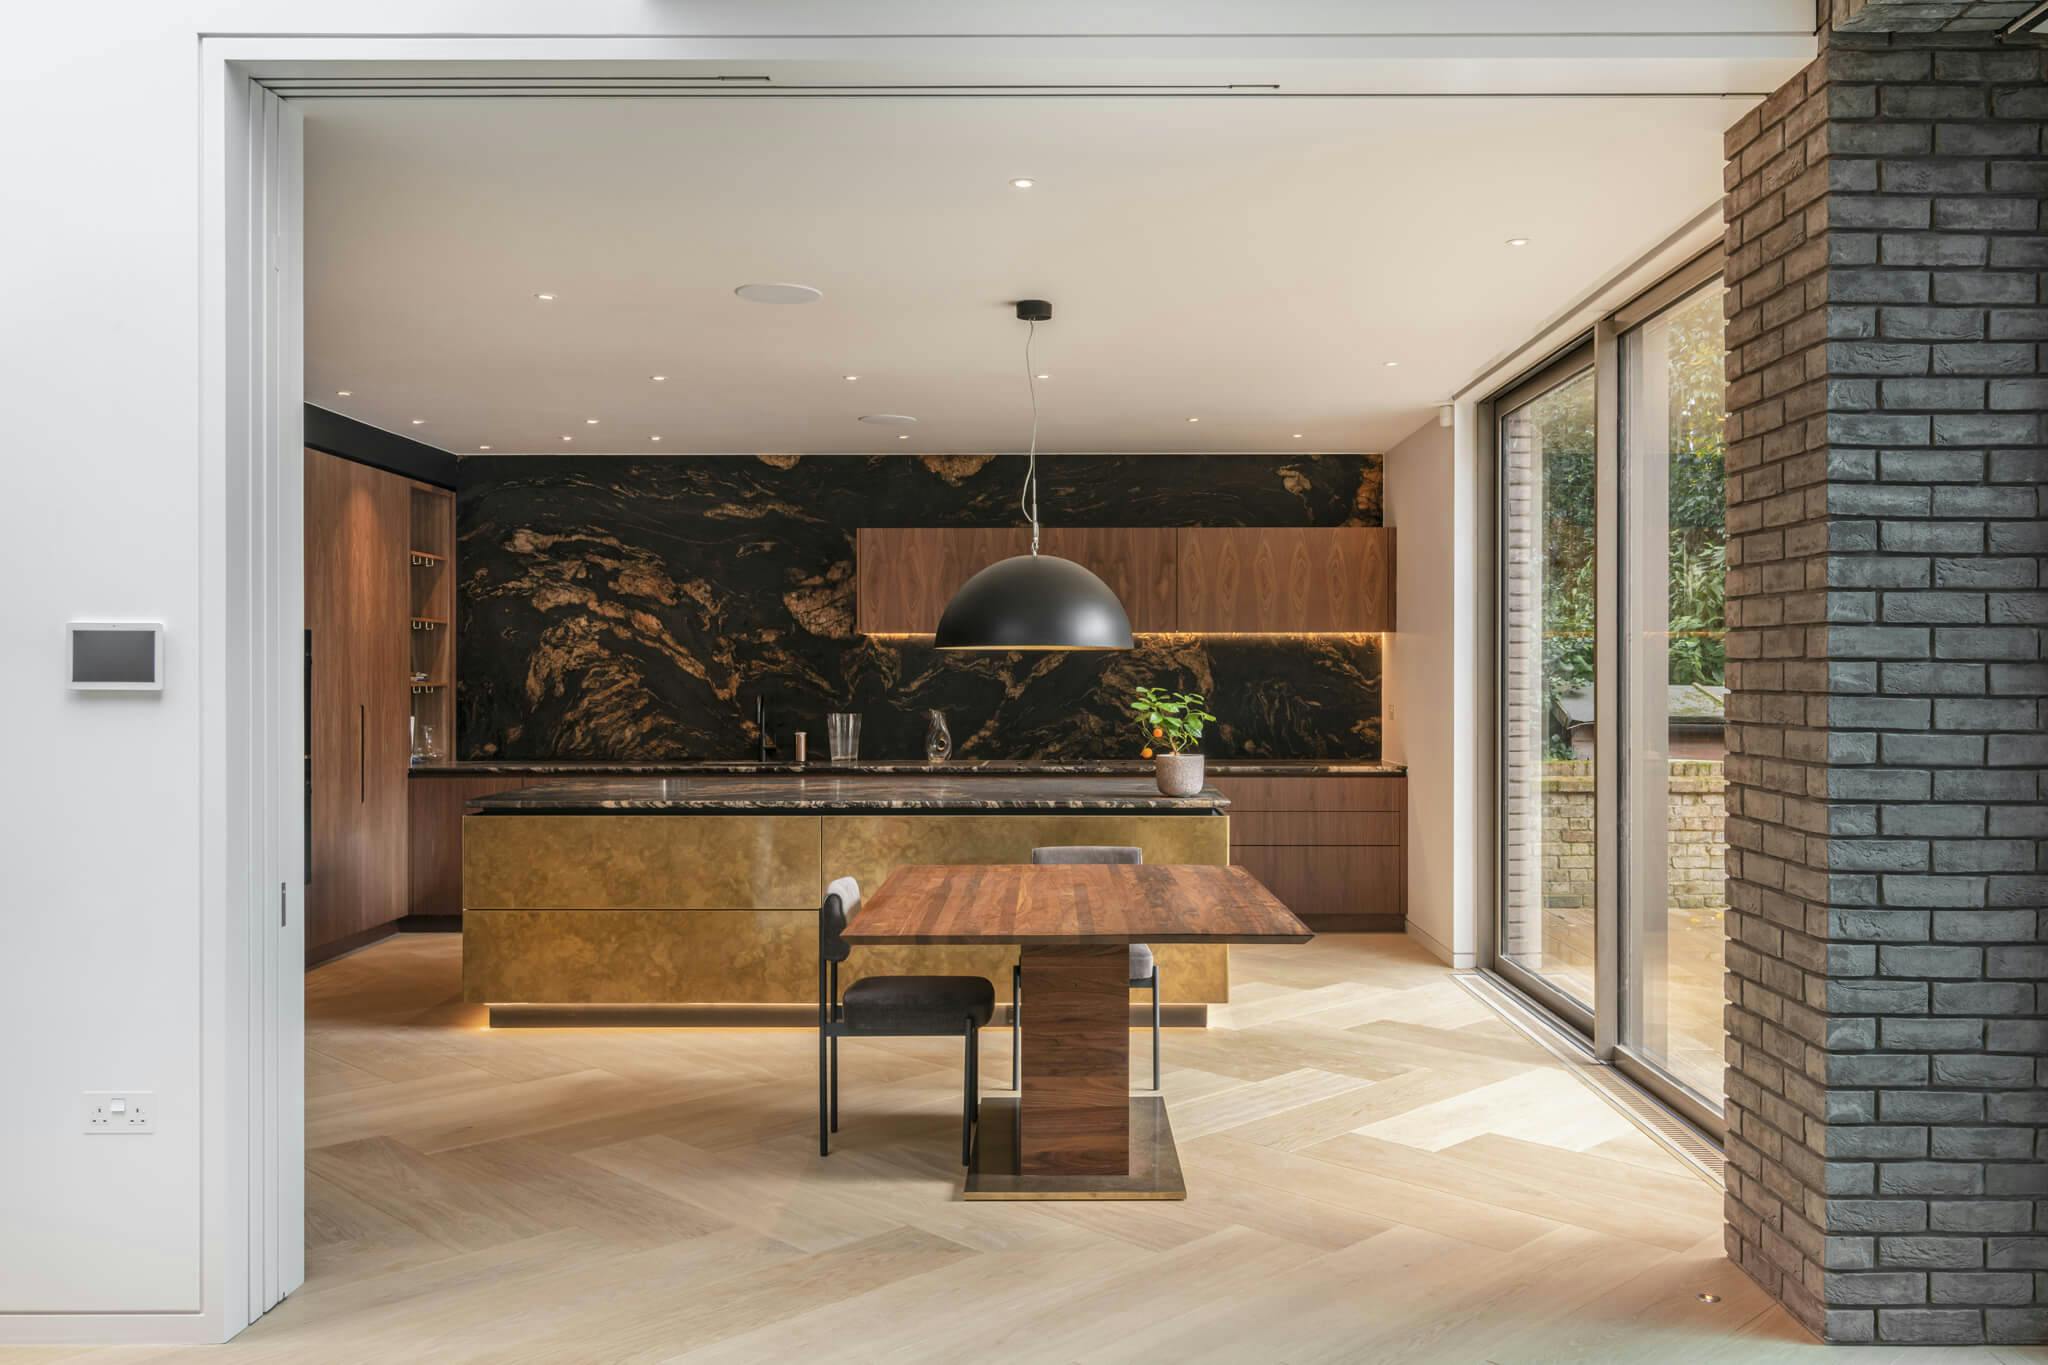 A fully open telescopic sliding door opening to a wooden floored brown marbled kitchen with a large metal dome light and exterior glazed sliding doors to the outside.